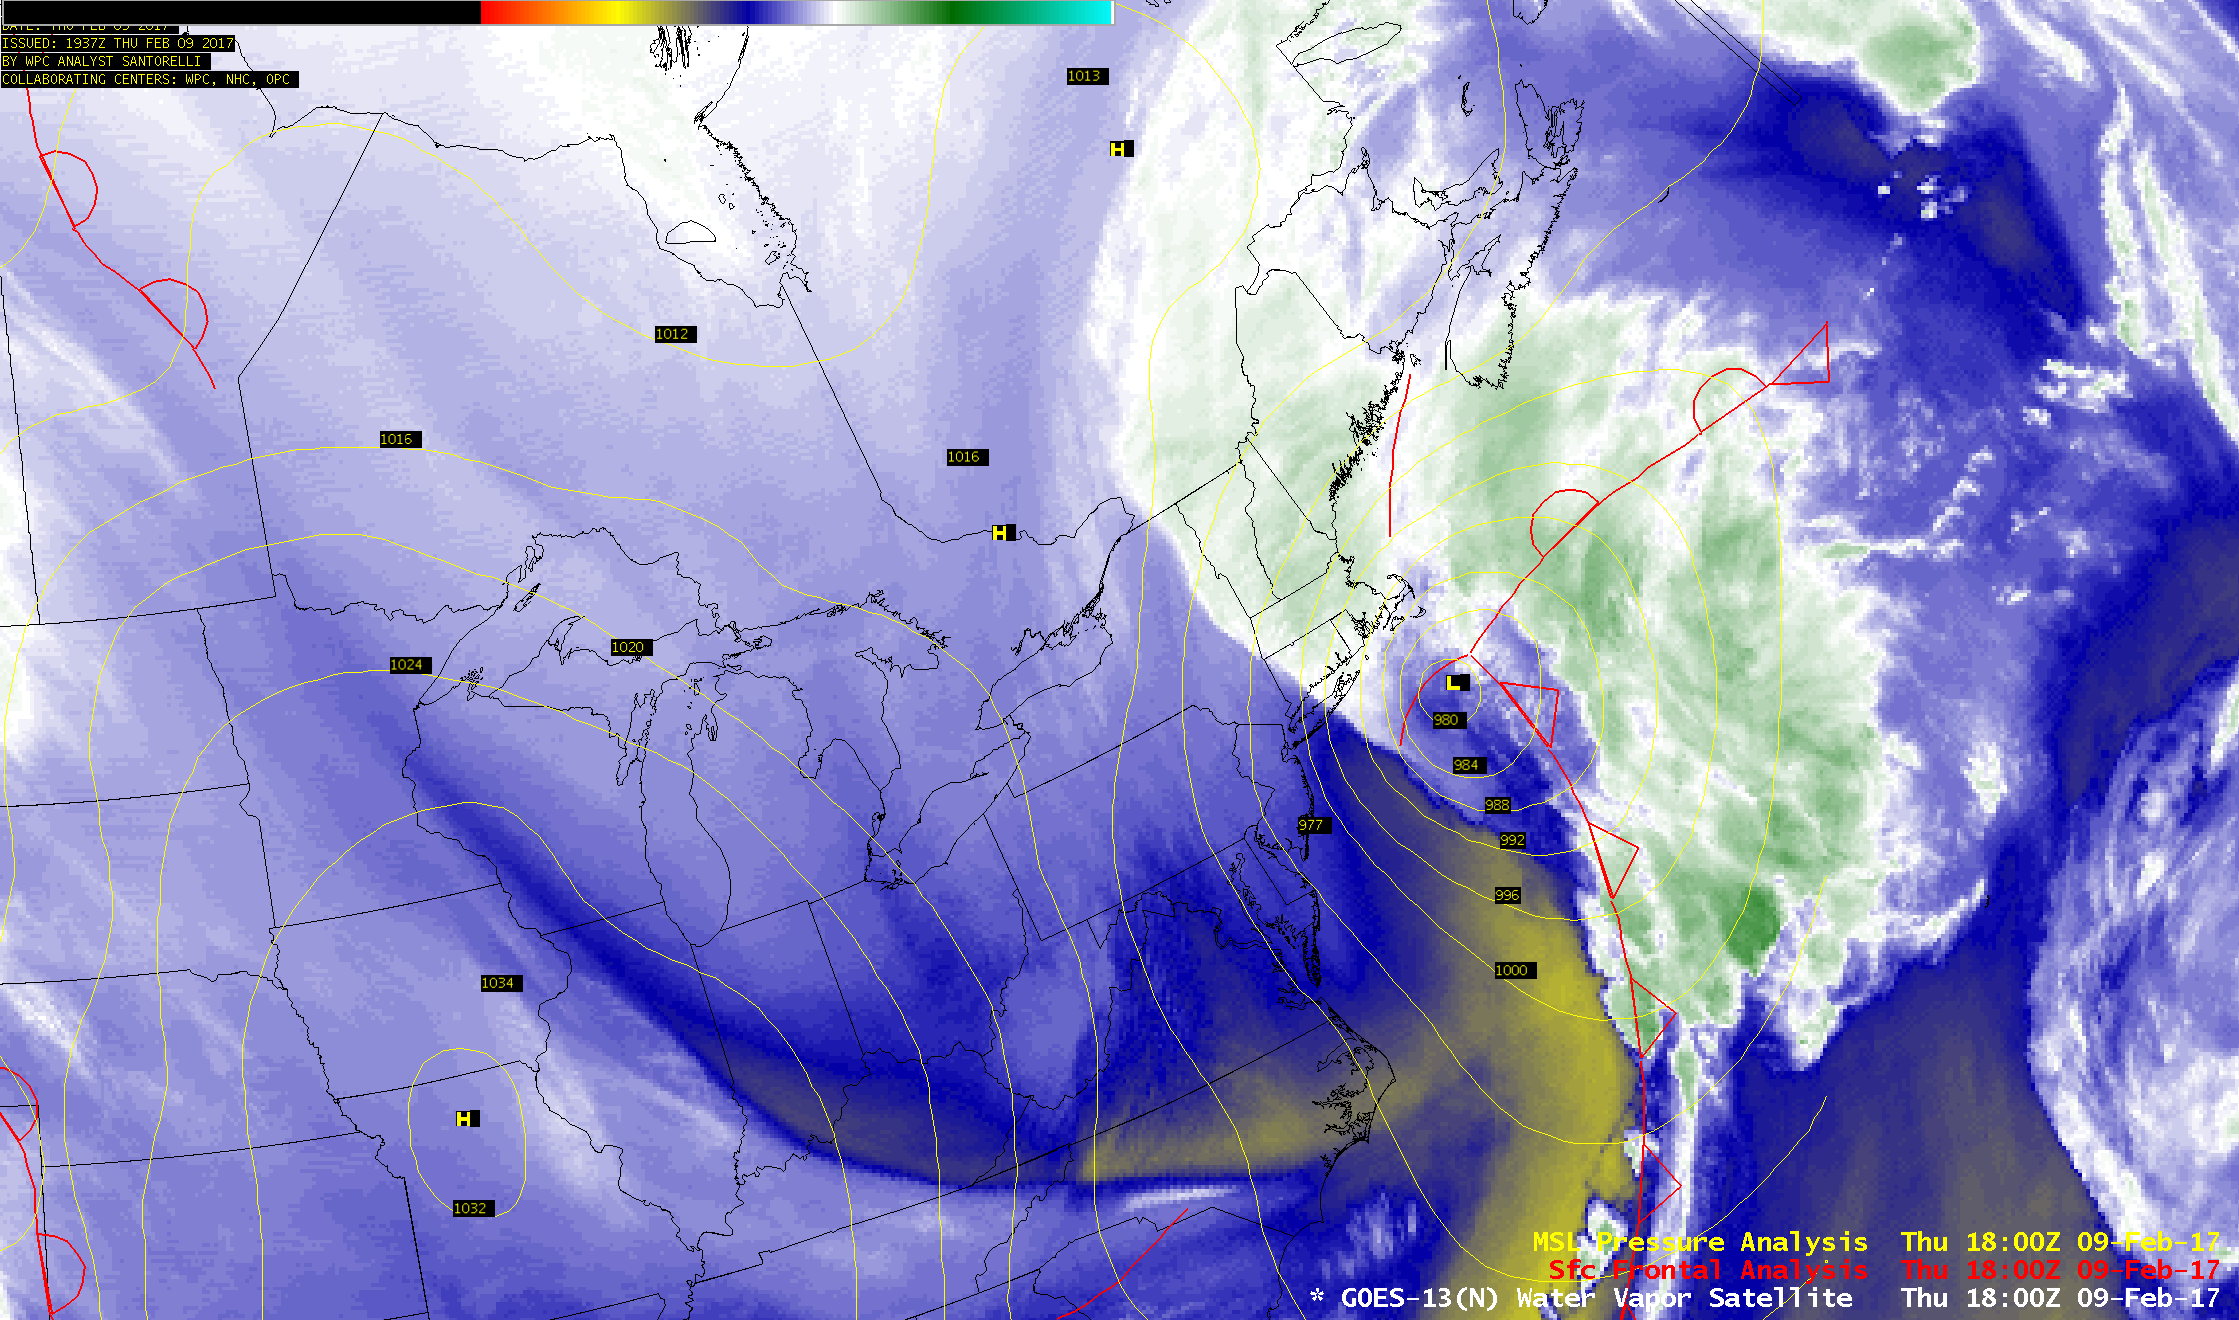 GOES-13 Water Vapor (6.5 µm) images, with surface fronts and MSLP pressure [click to play animation]